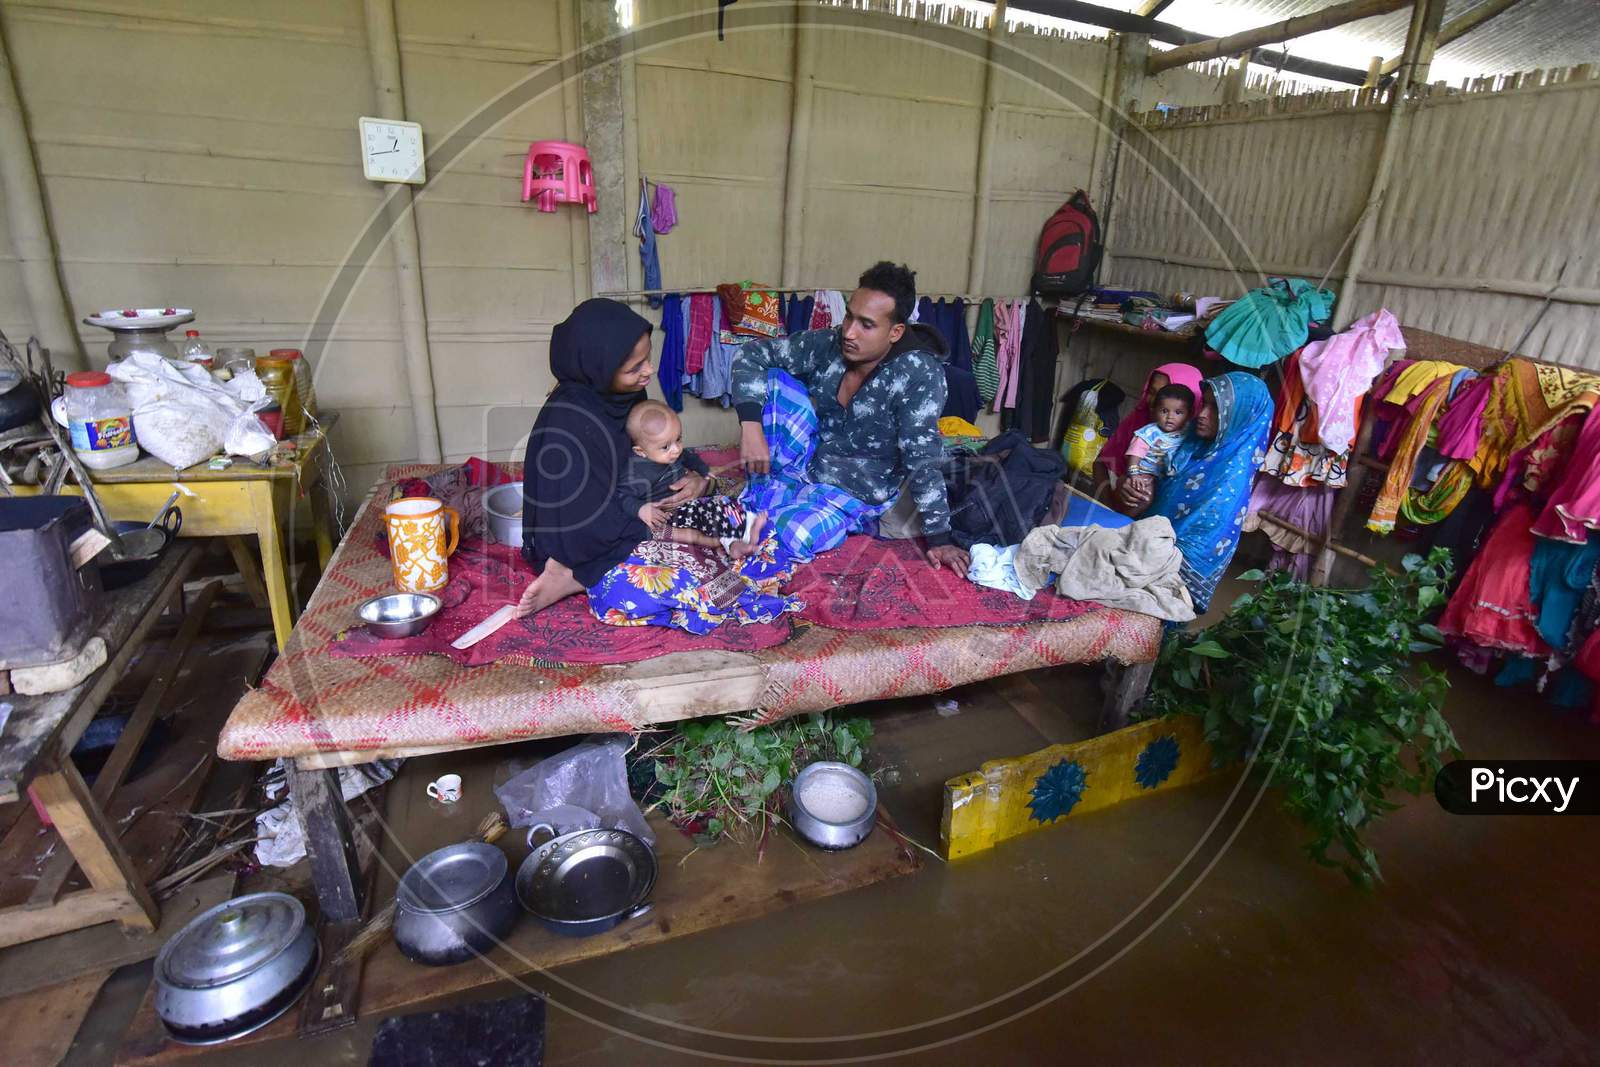 A Flood Affected Family  Takes Shelter  On A Bed Inside His Submerged House At   At Flood Affected Bakulguri Village Near Kampur In Nagaon District Of Assam On May 27,2020